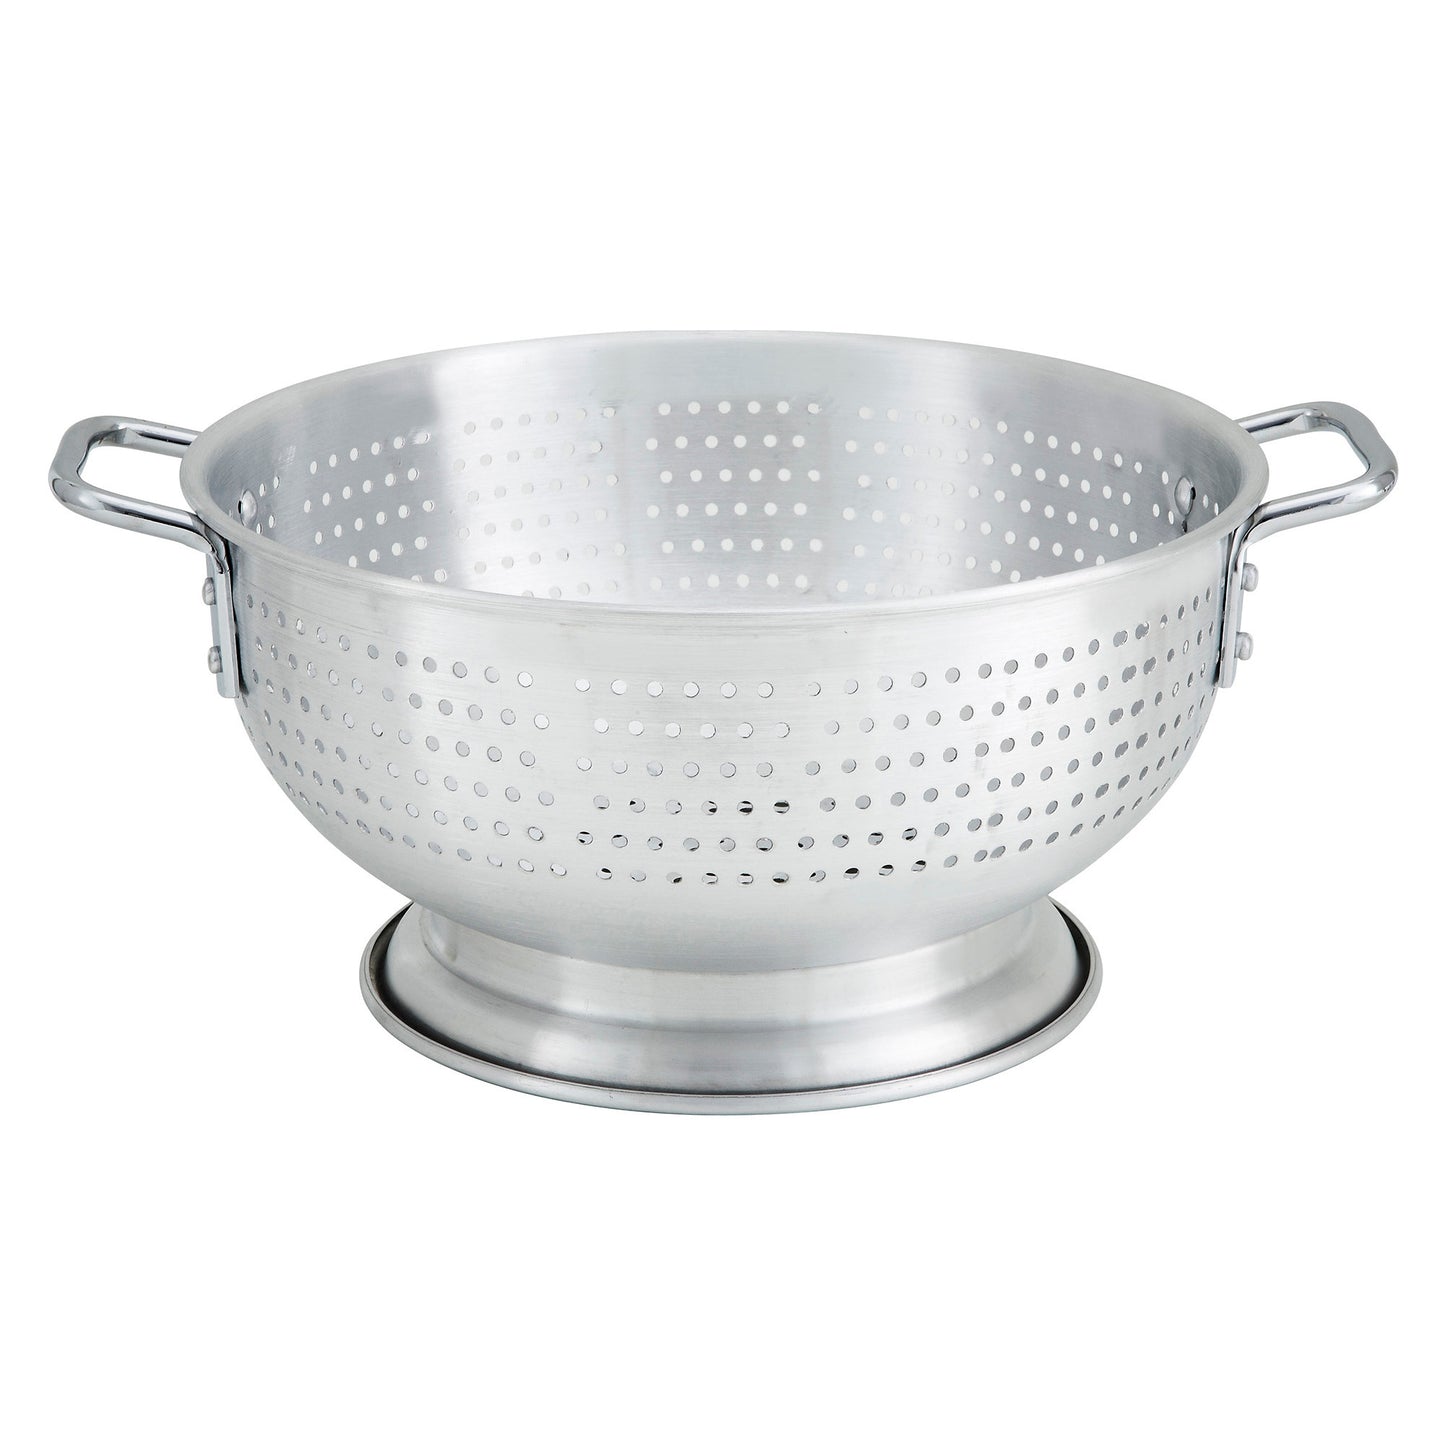 ALO-8BH - 8 Quart Colander with Handles and Foot